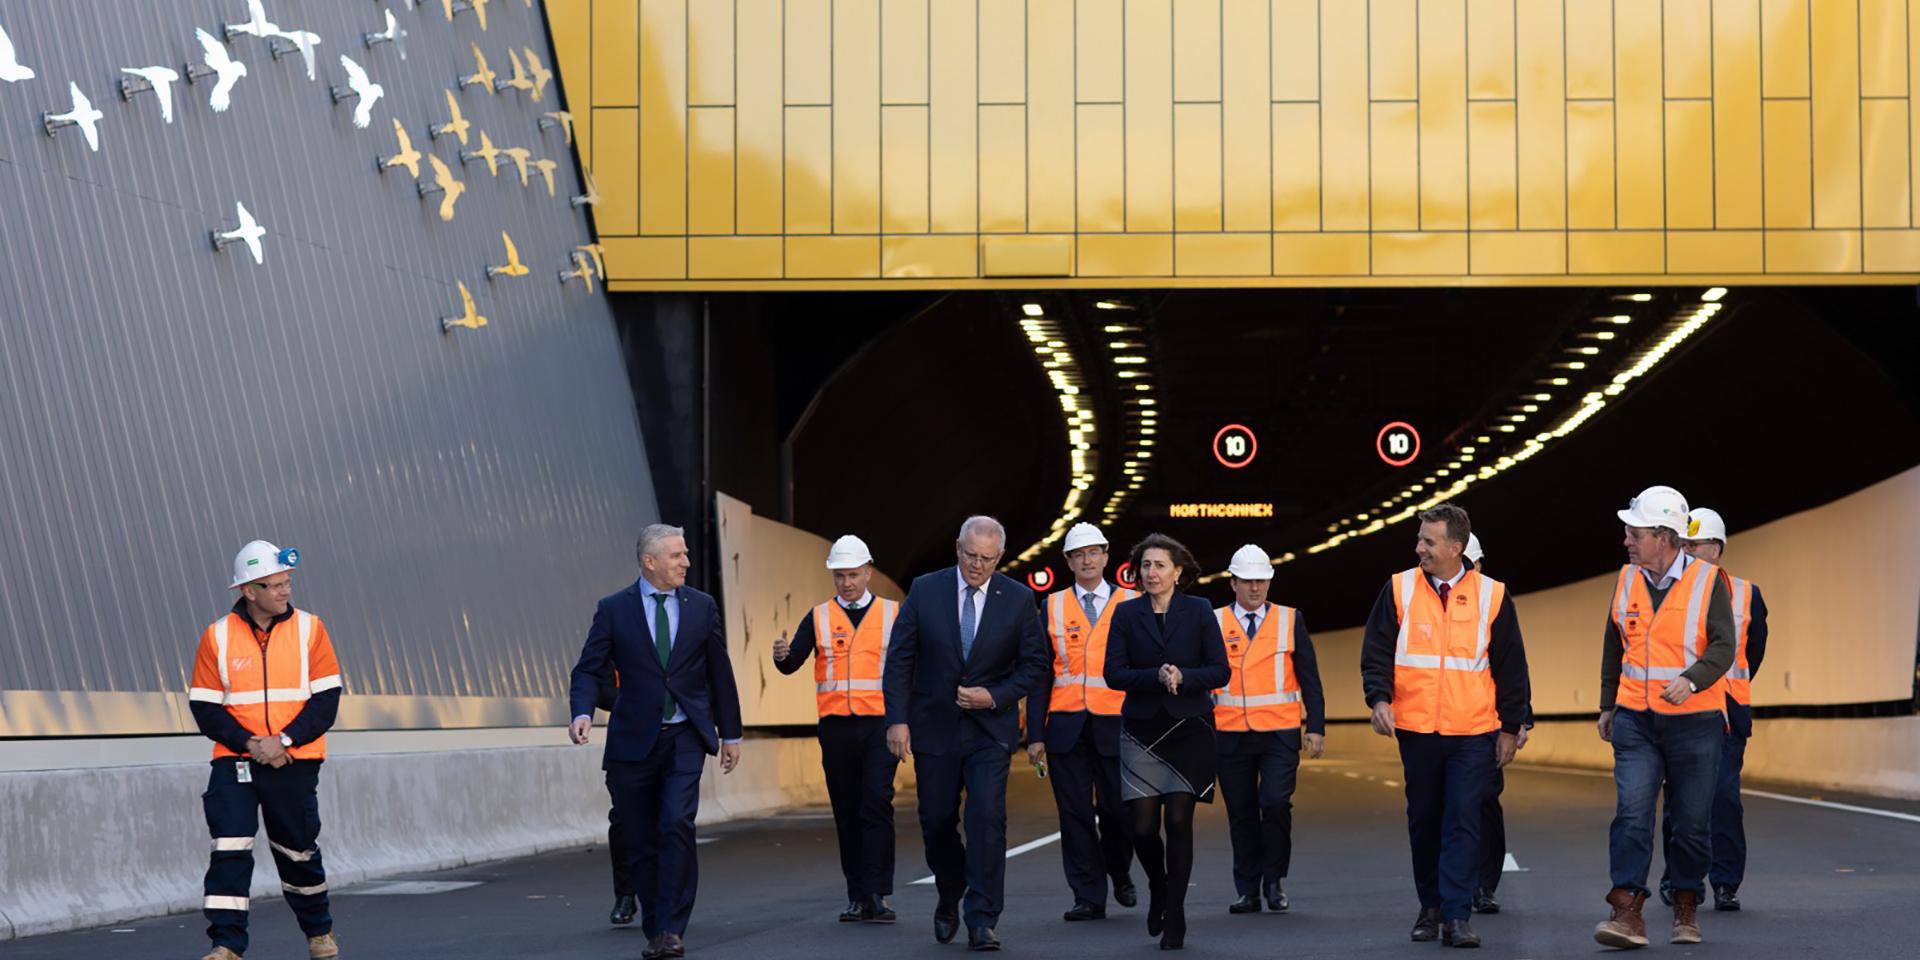 First end-to-end drive through NorthConnex Tunnel